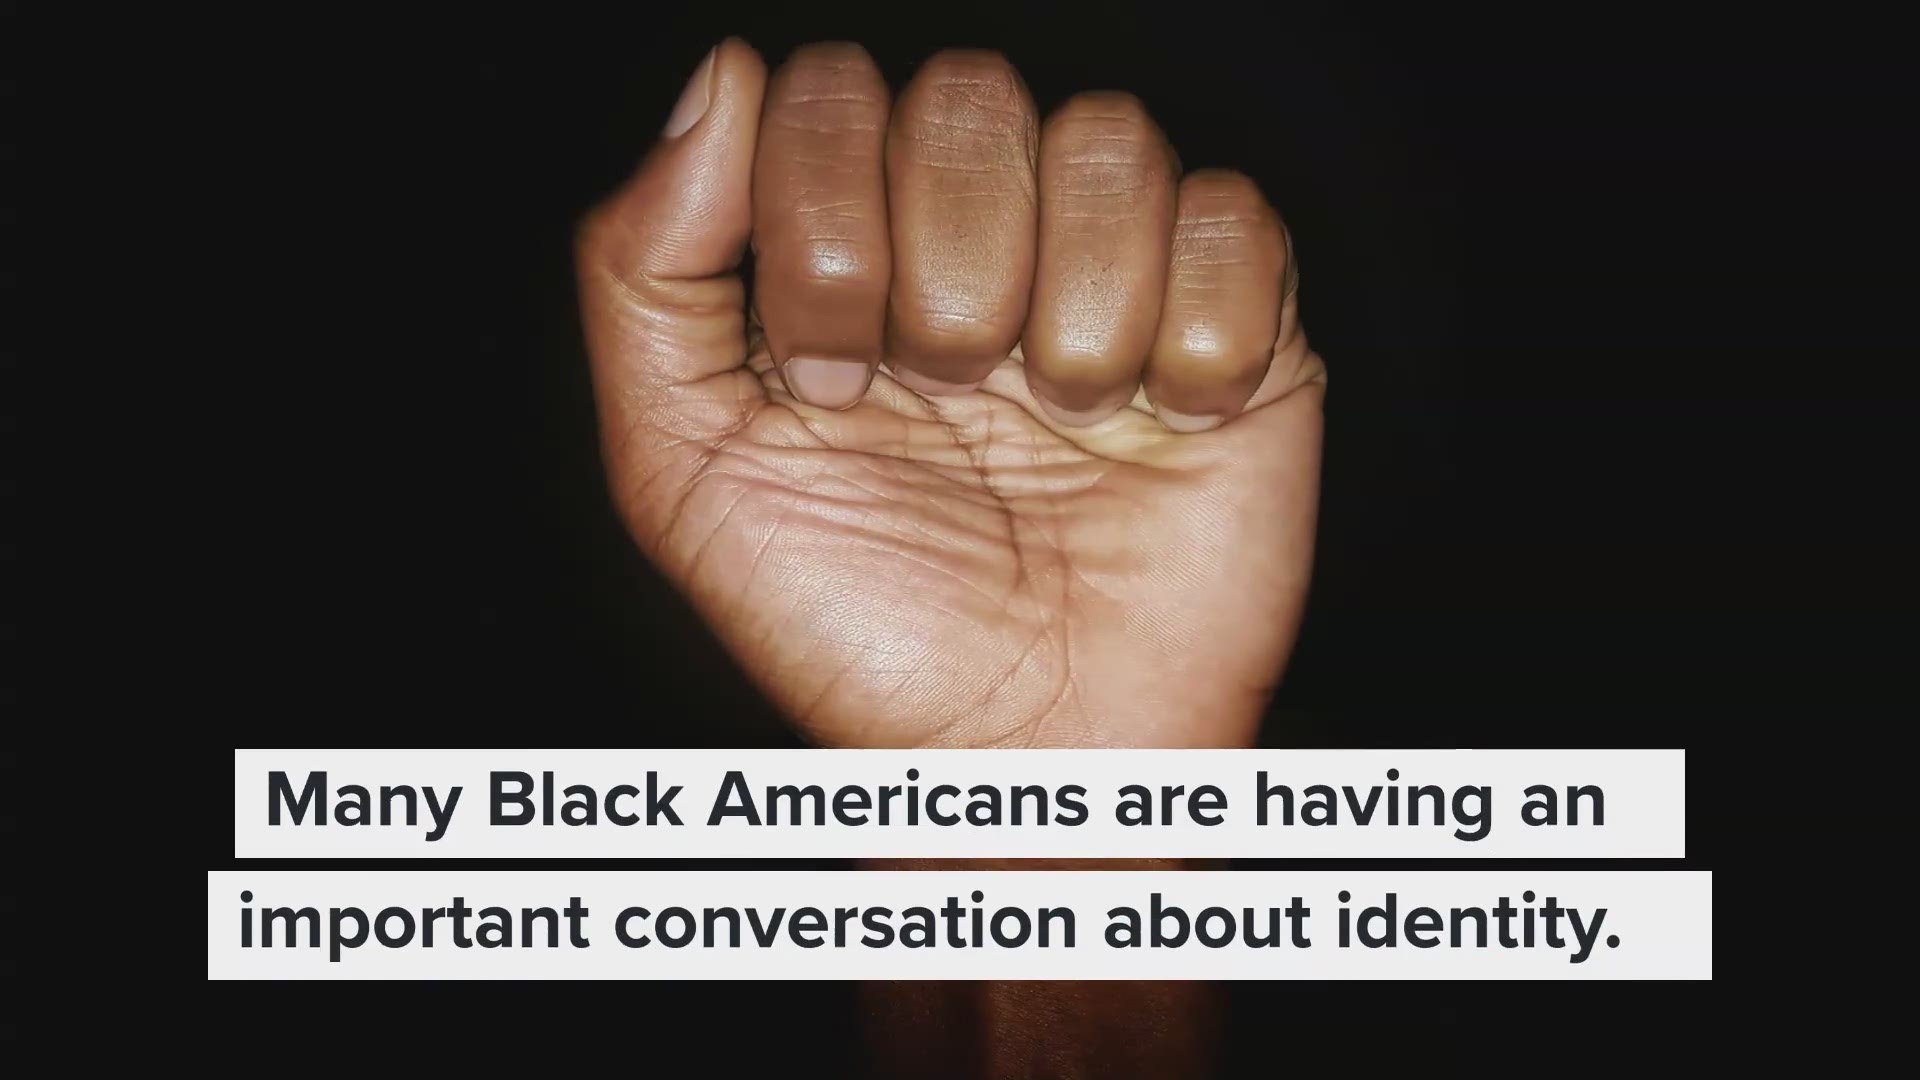 When it comes to Black Americans, there are several terms often used to identify people from the community. We asked our social audience: We you rather be called Black or African-American? Here are some of their responses.